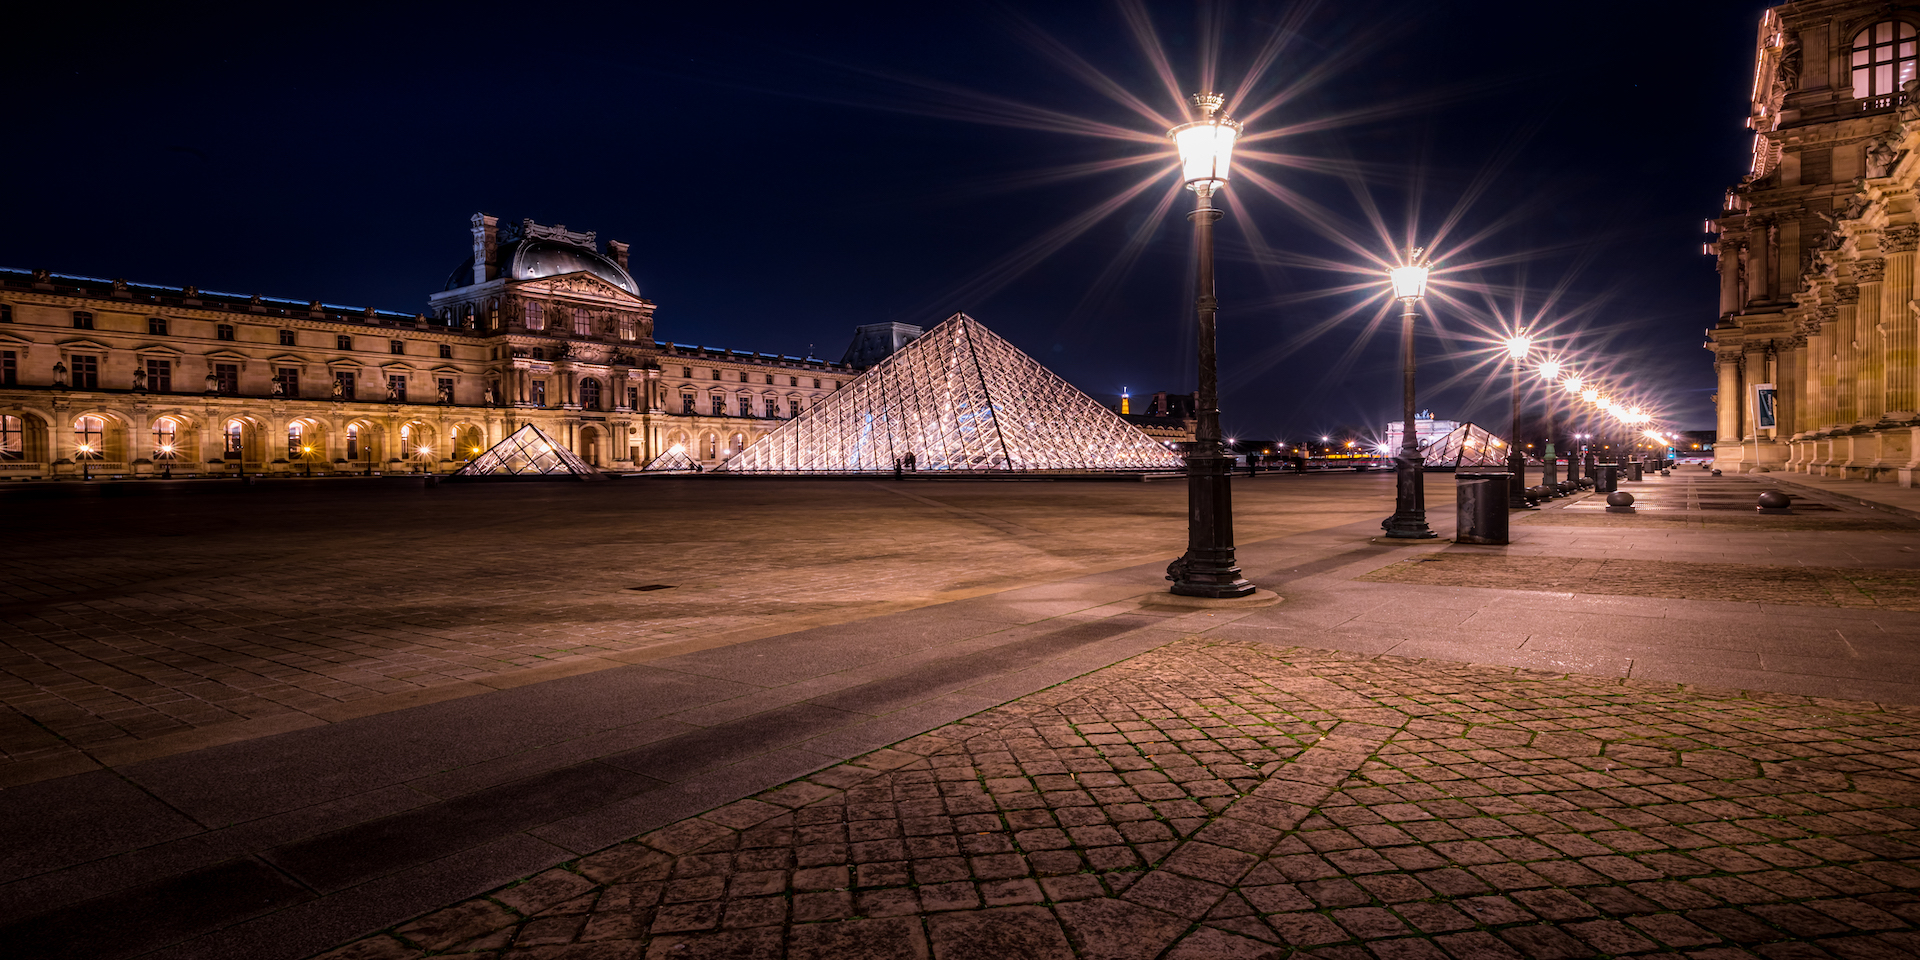 Louvre in the night